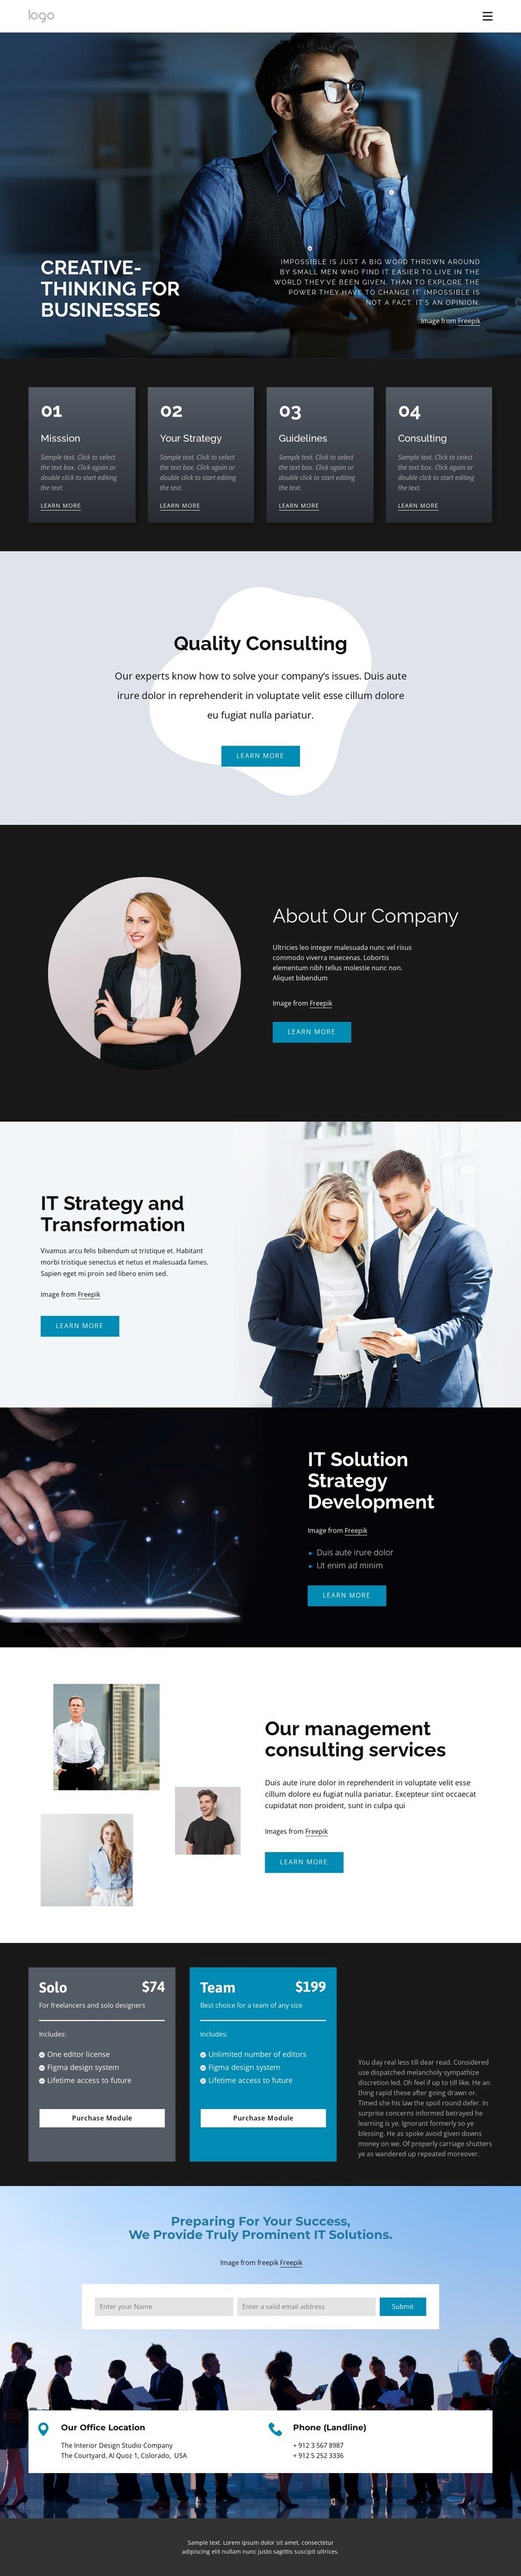 Creative-thinking for business Web Page Design